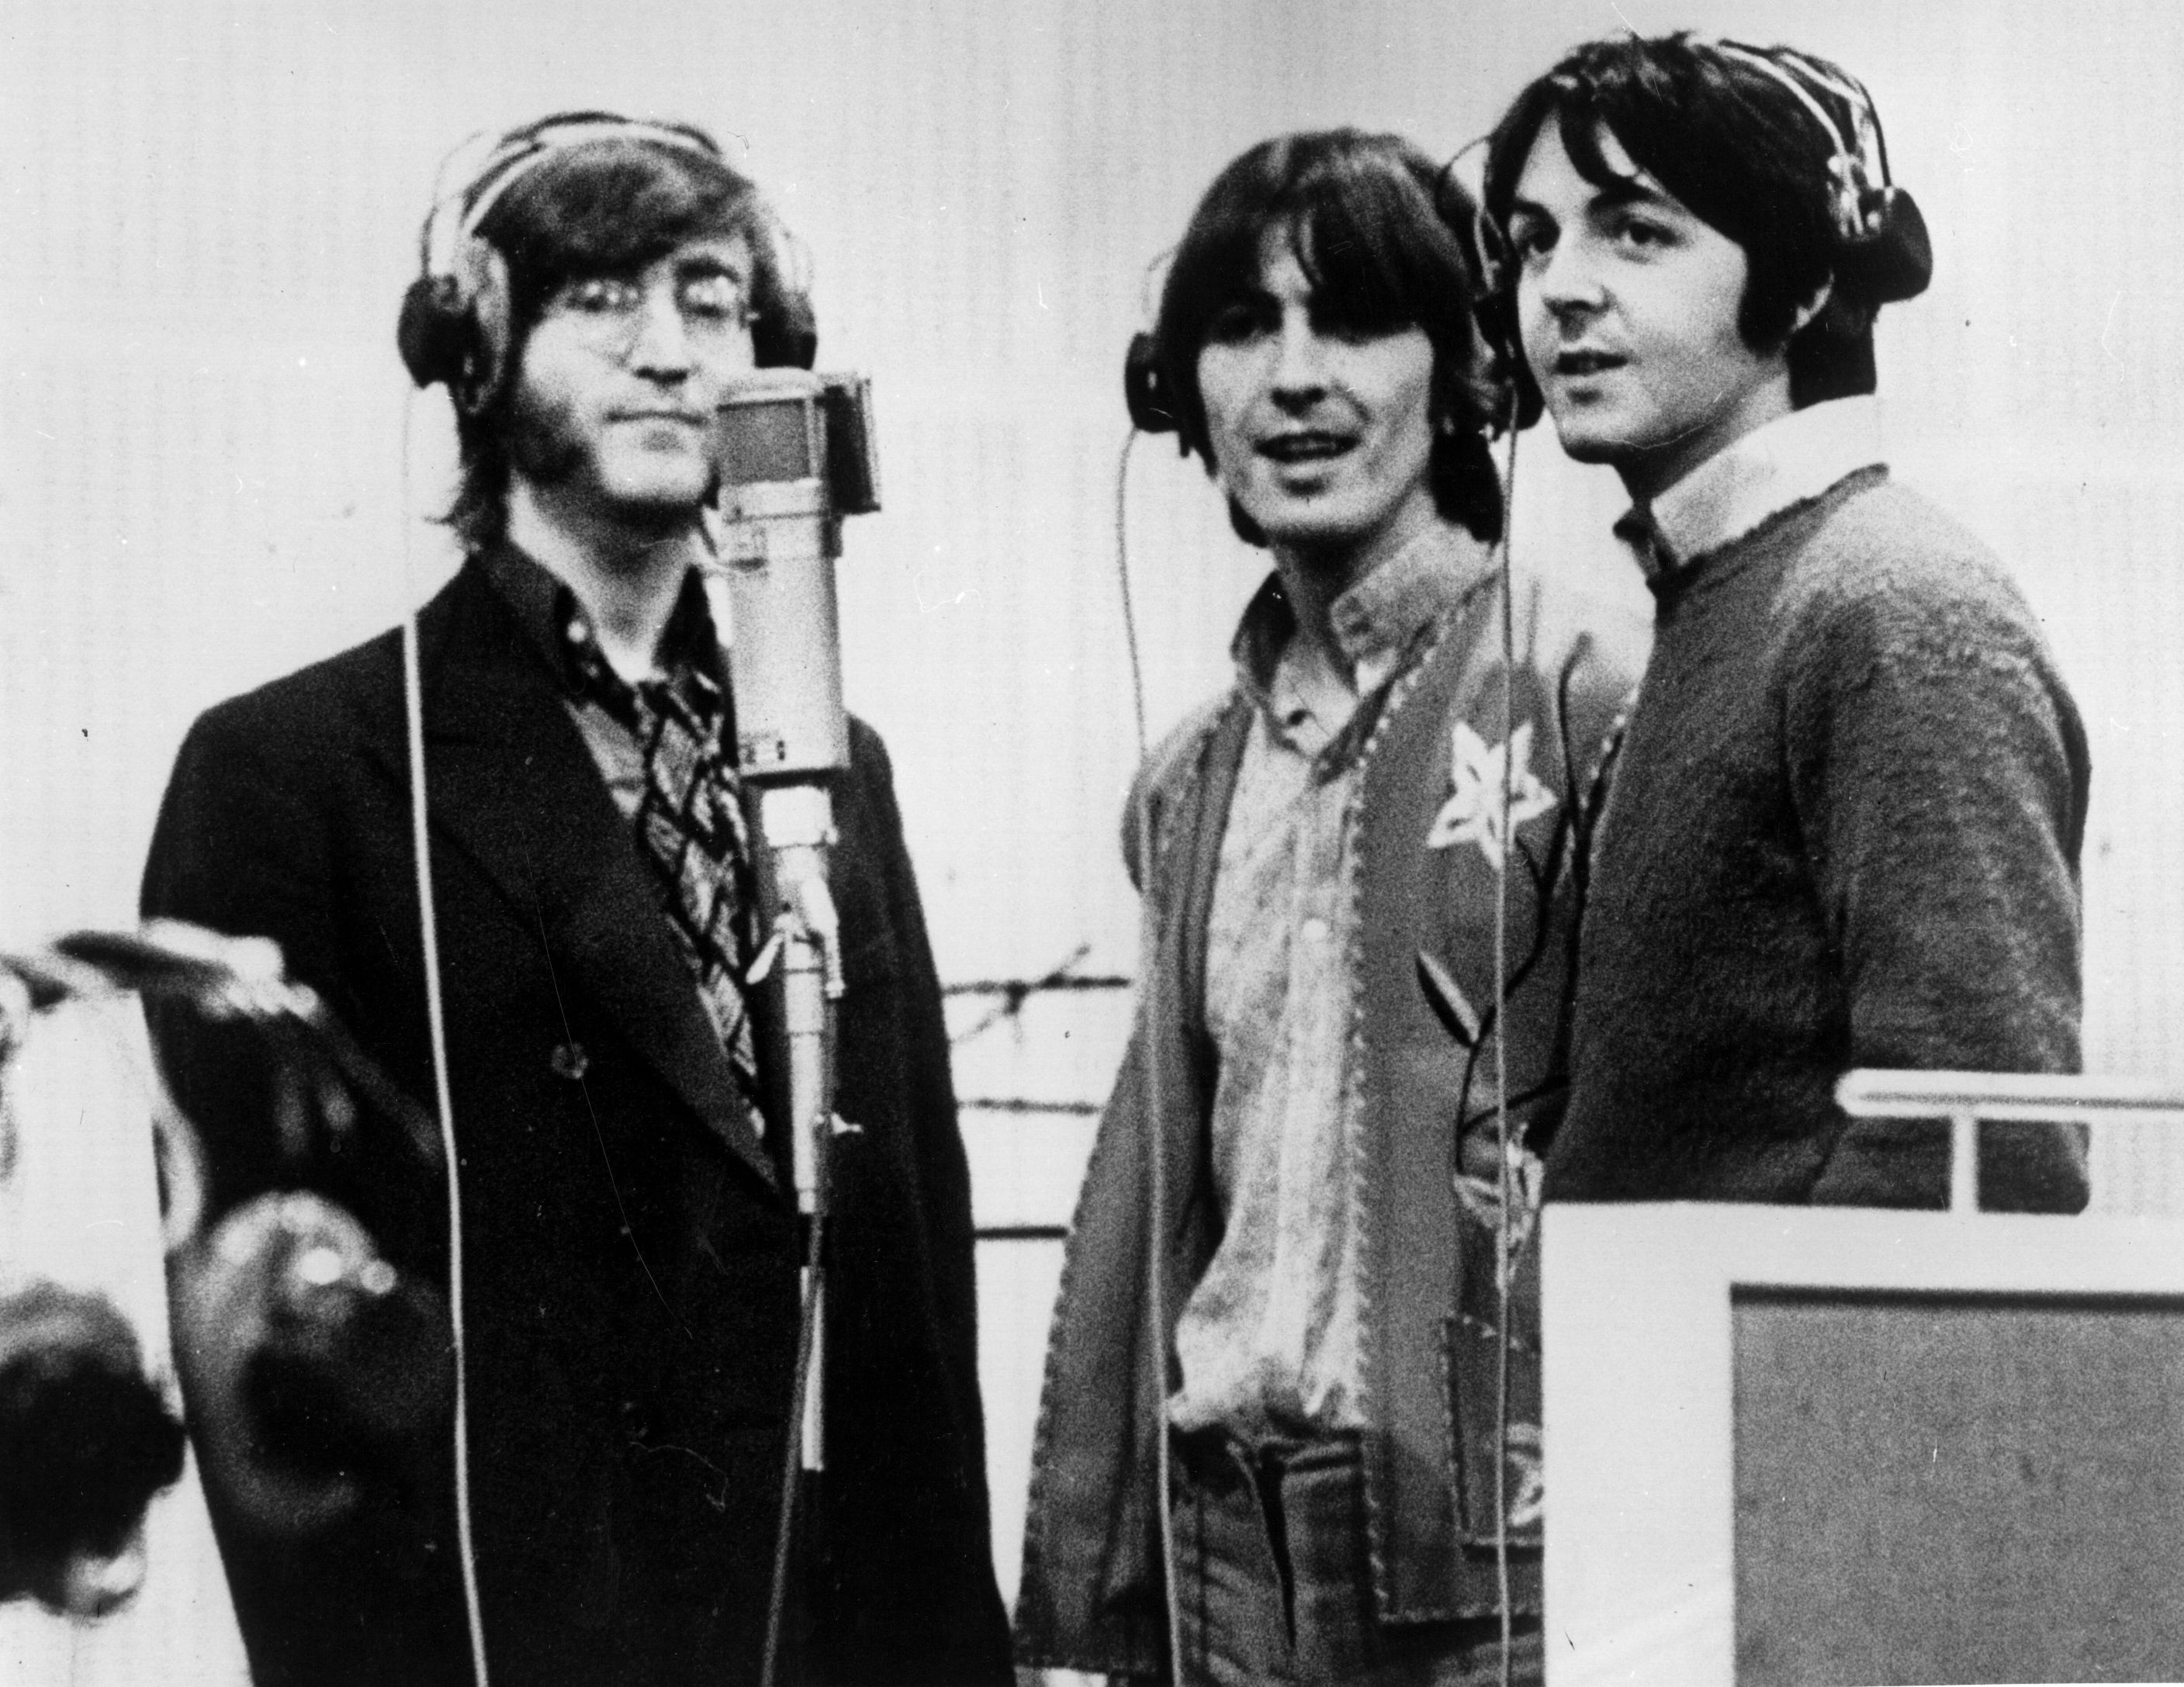 The Beatles’ John Lennon, George Harrison, and Paul McCartney with microphones